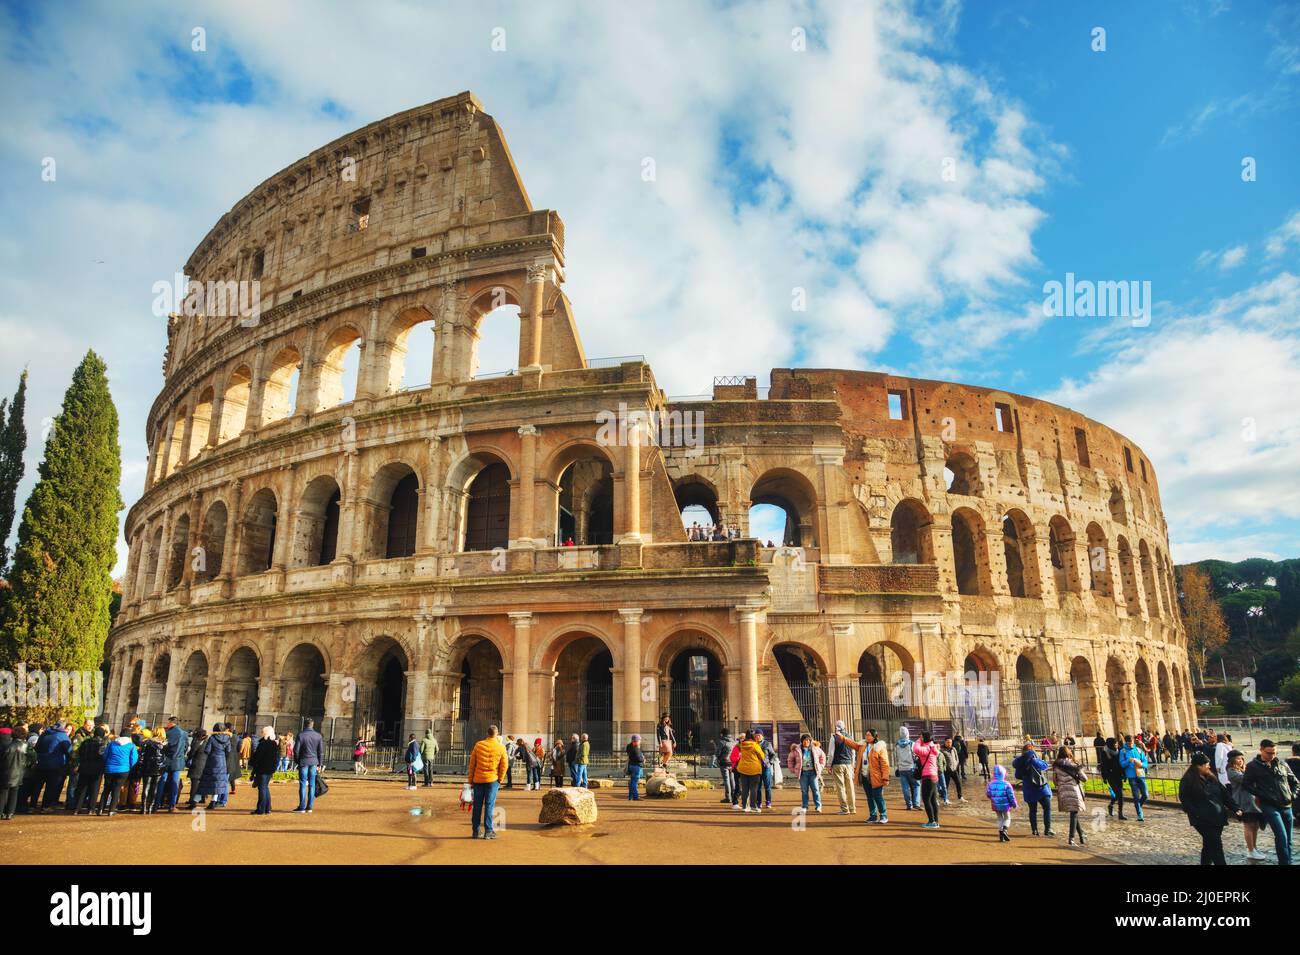 Colosseum or Flavian Amphitheatre with people Stock Photo